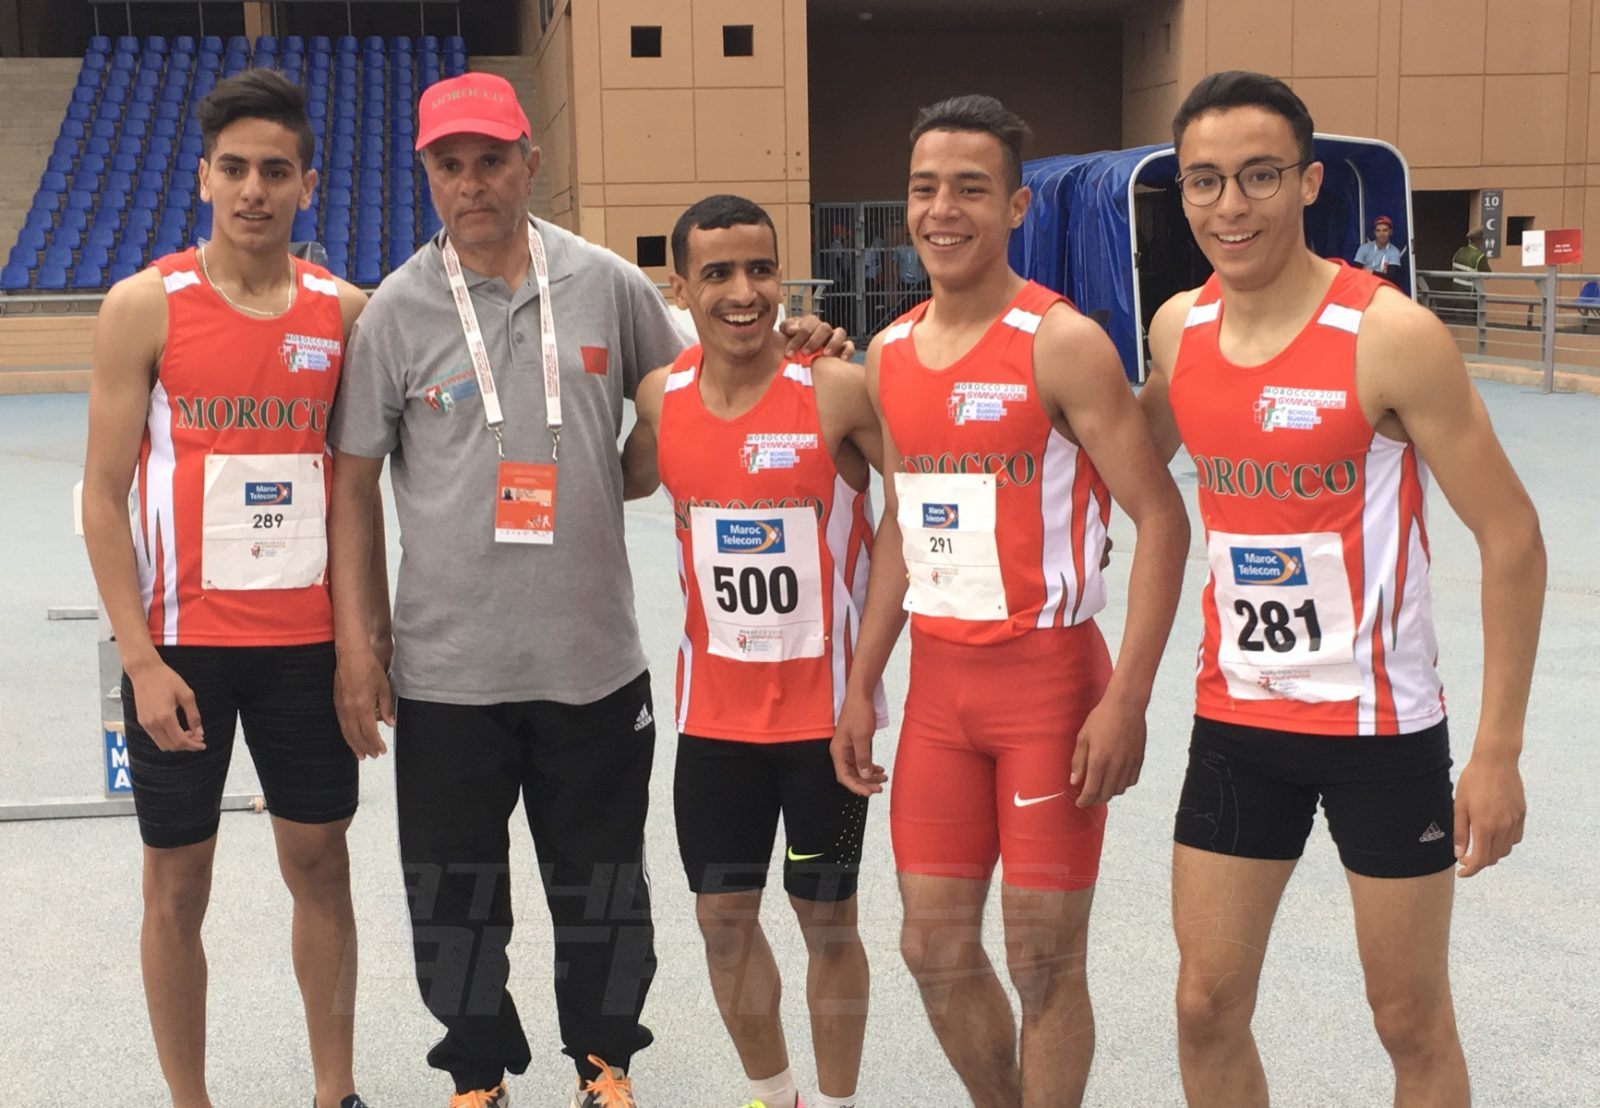 Morocco's Boys 4x400m relay team after winning gold at Gymnasiade 2018 / Photo Credit: Yomi Omogbeja